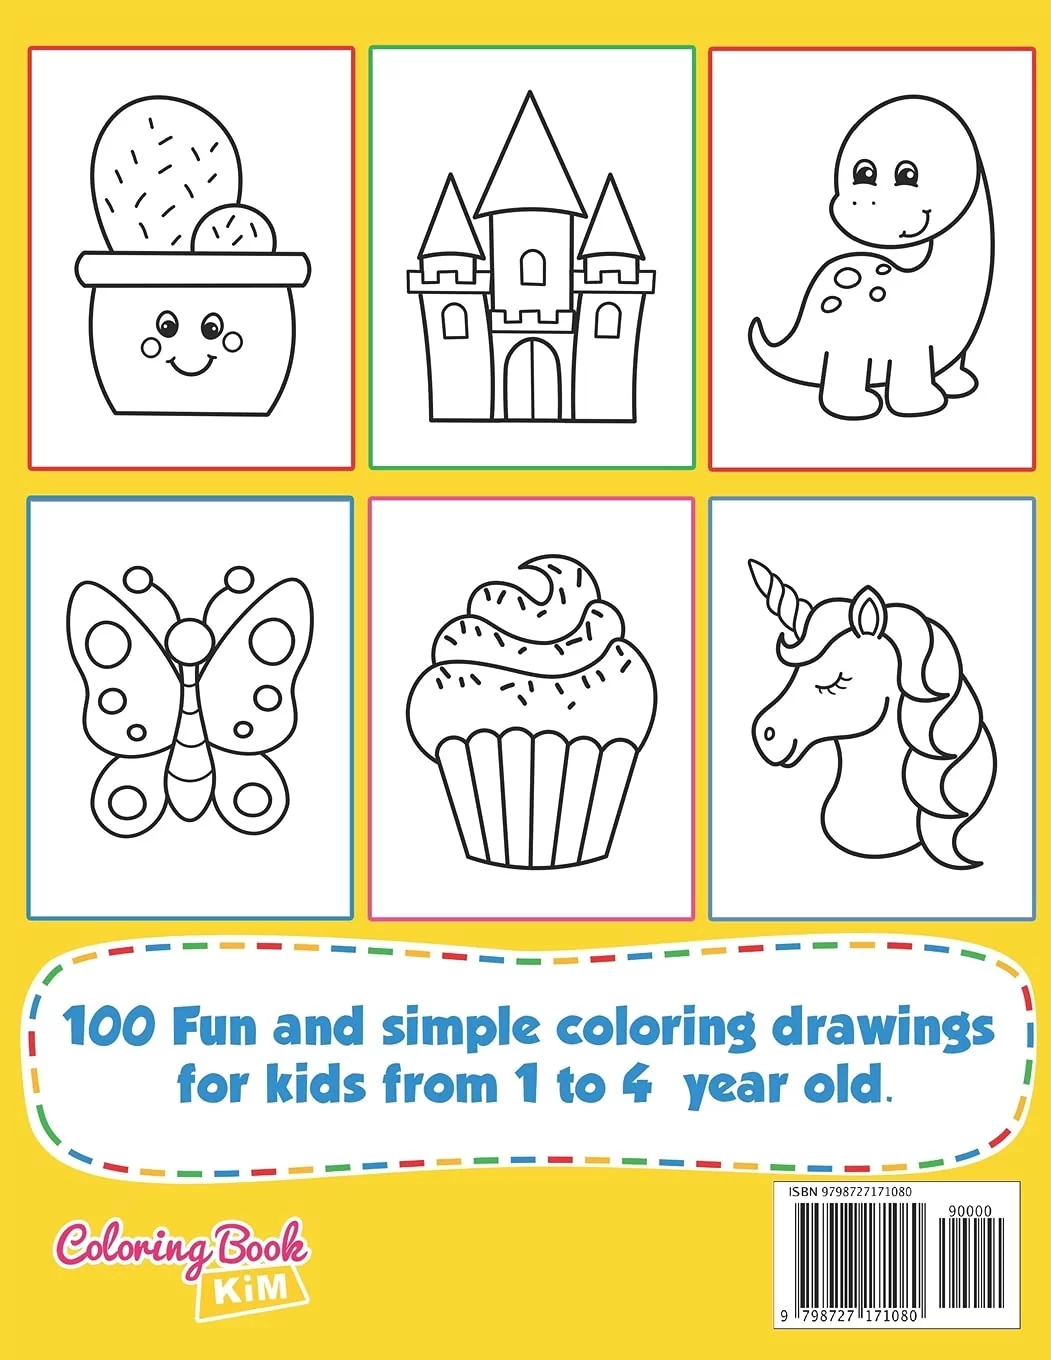 Garden Swirls Coloring Sheet for Adults and Kids 